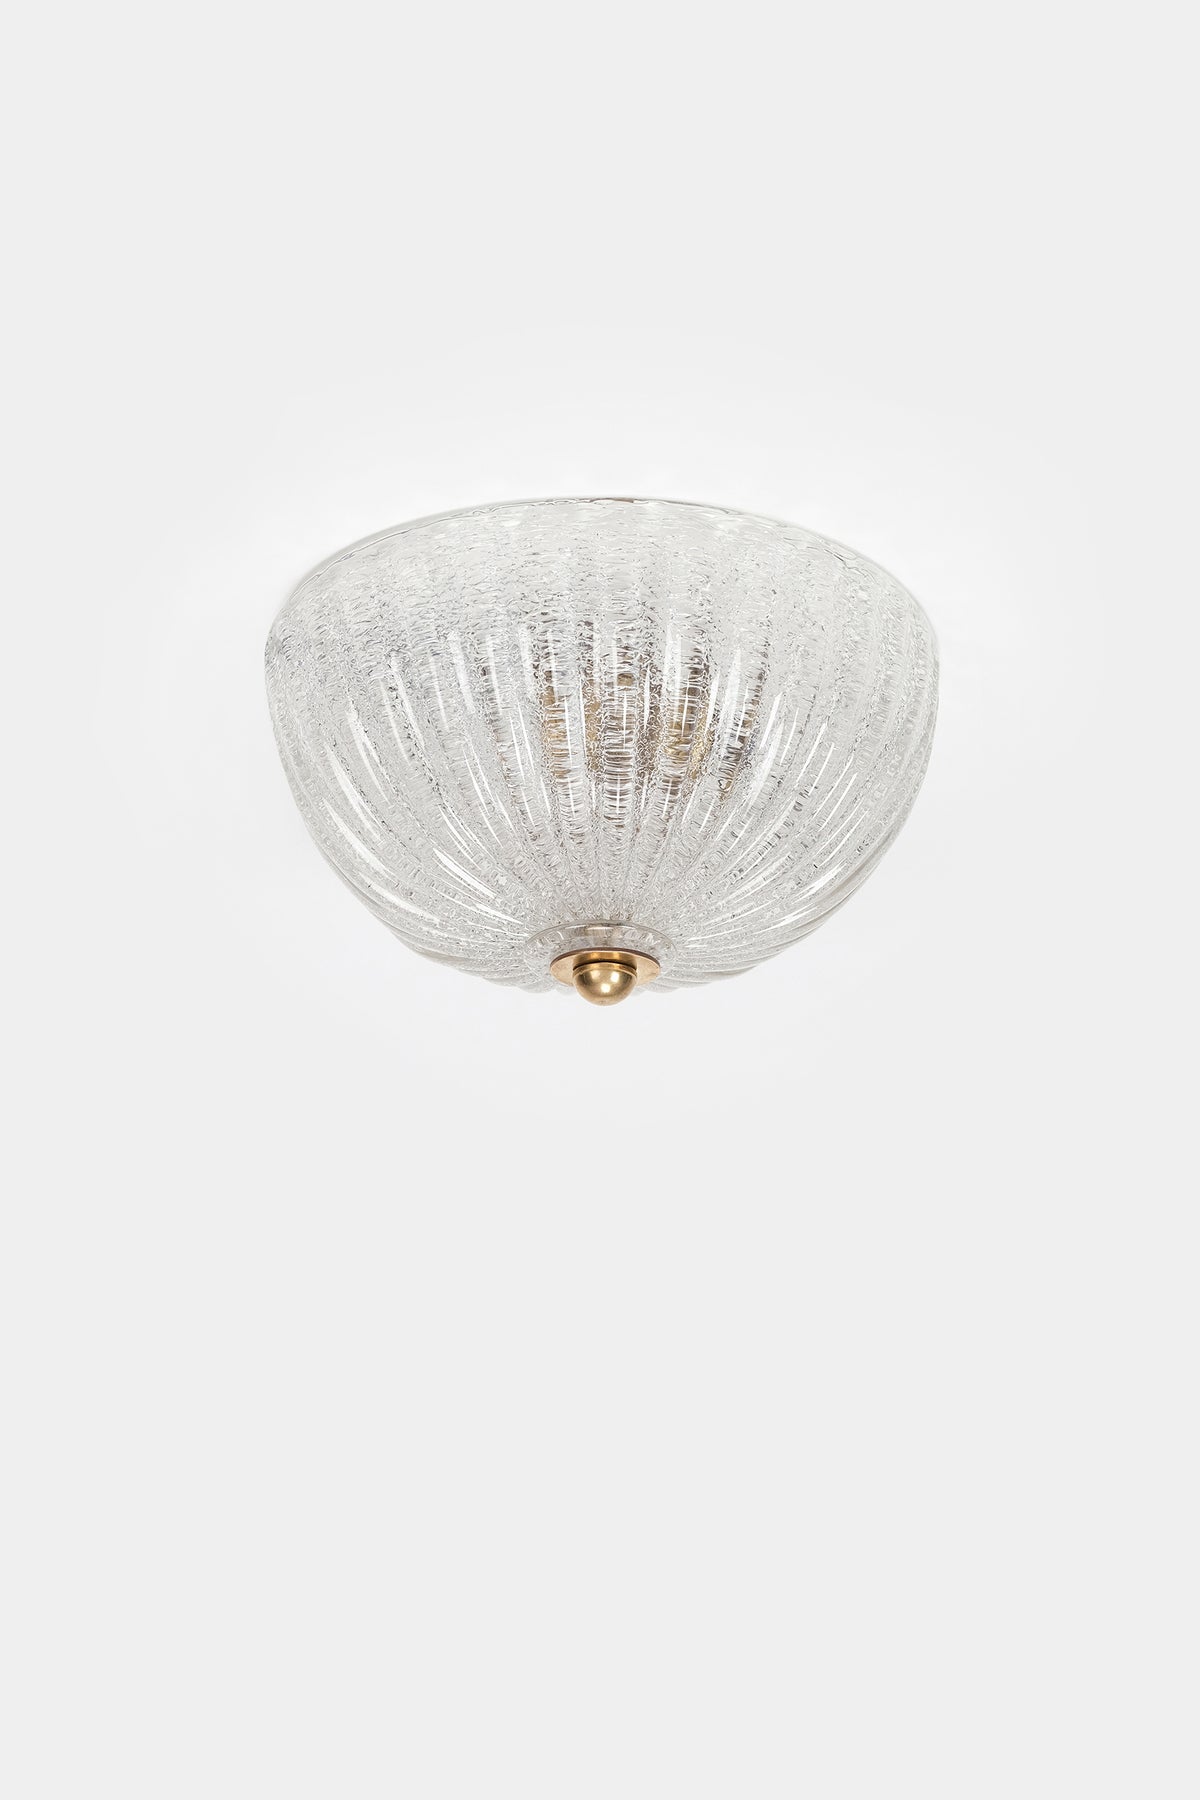 Ceiling light with Glass Dome, Barovier & Toso, 40s